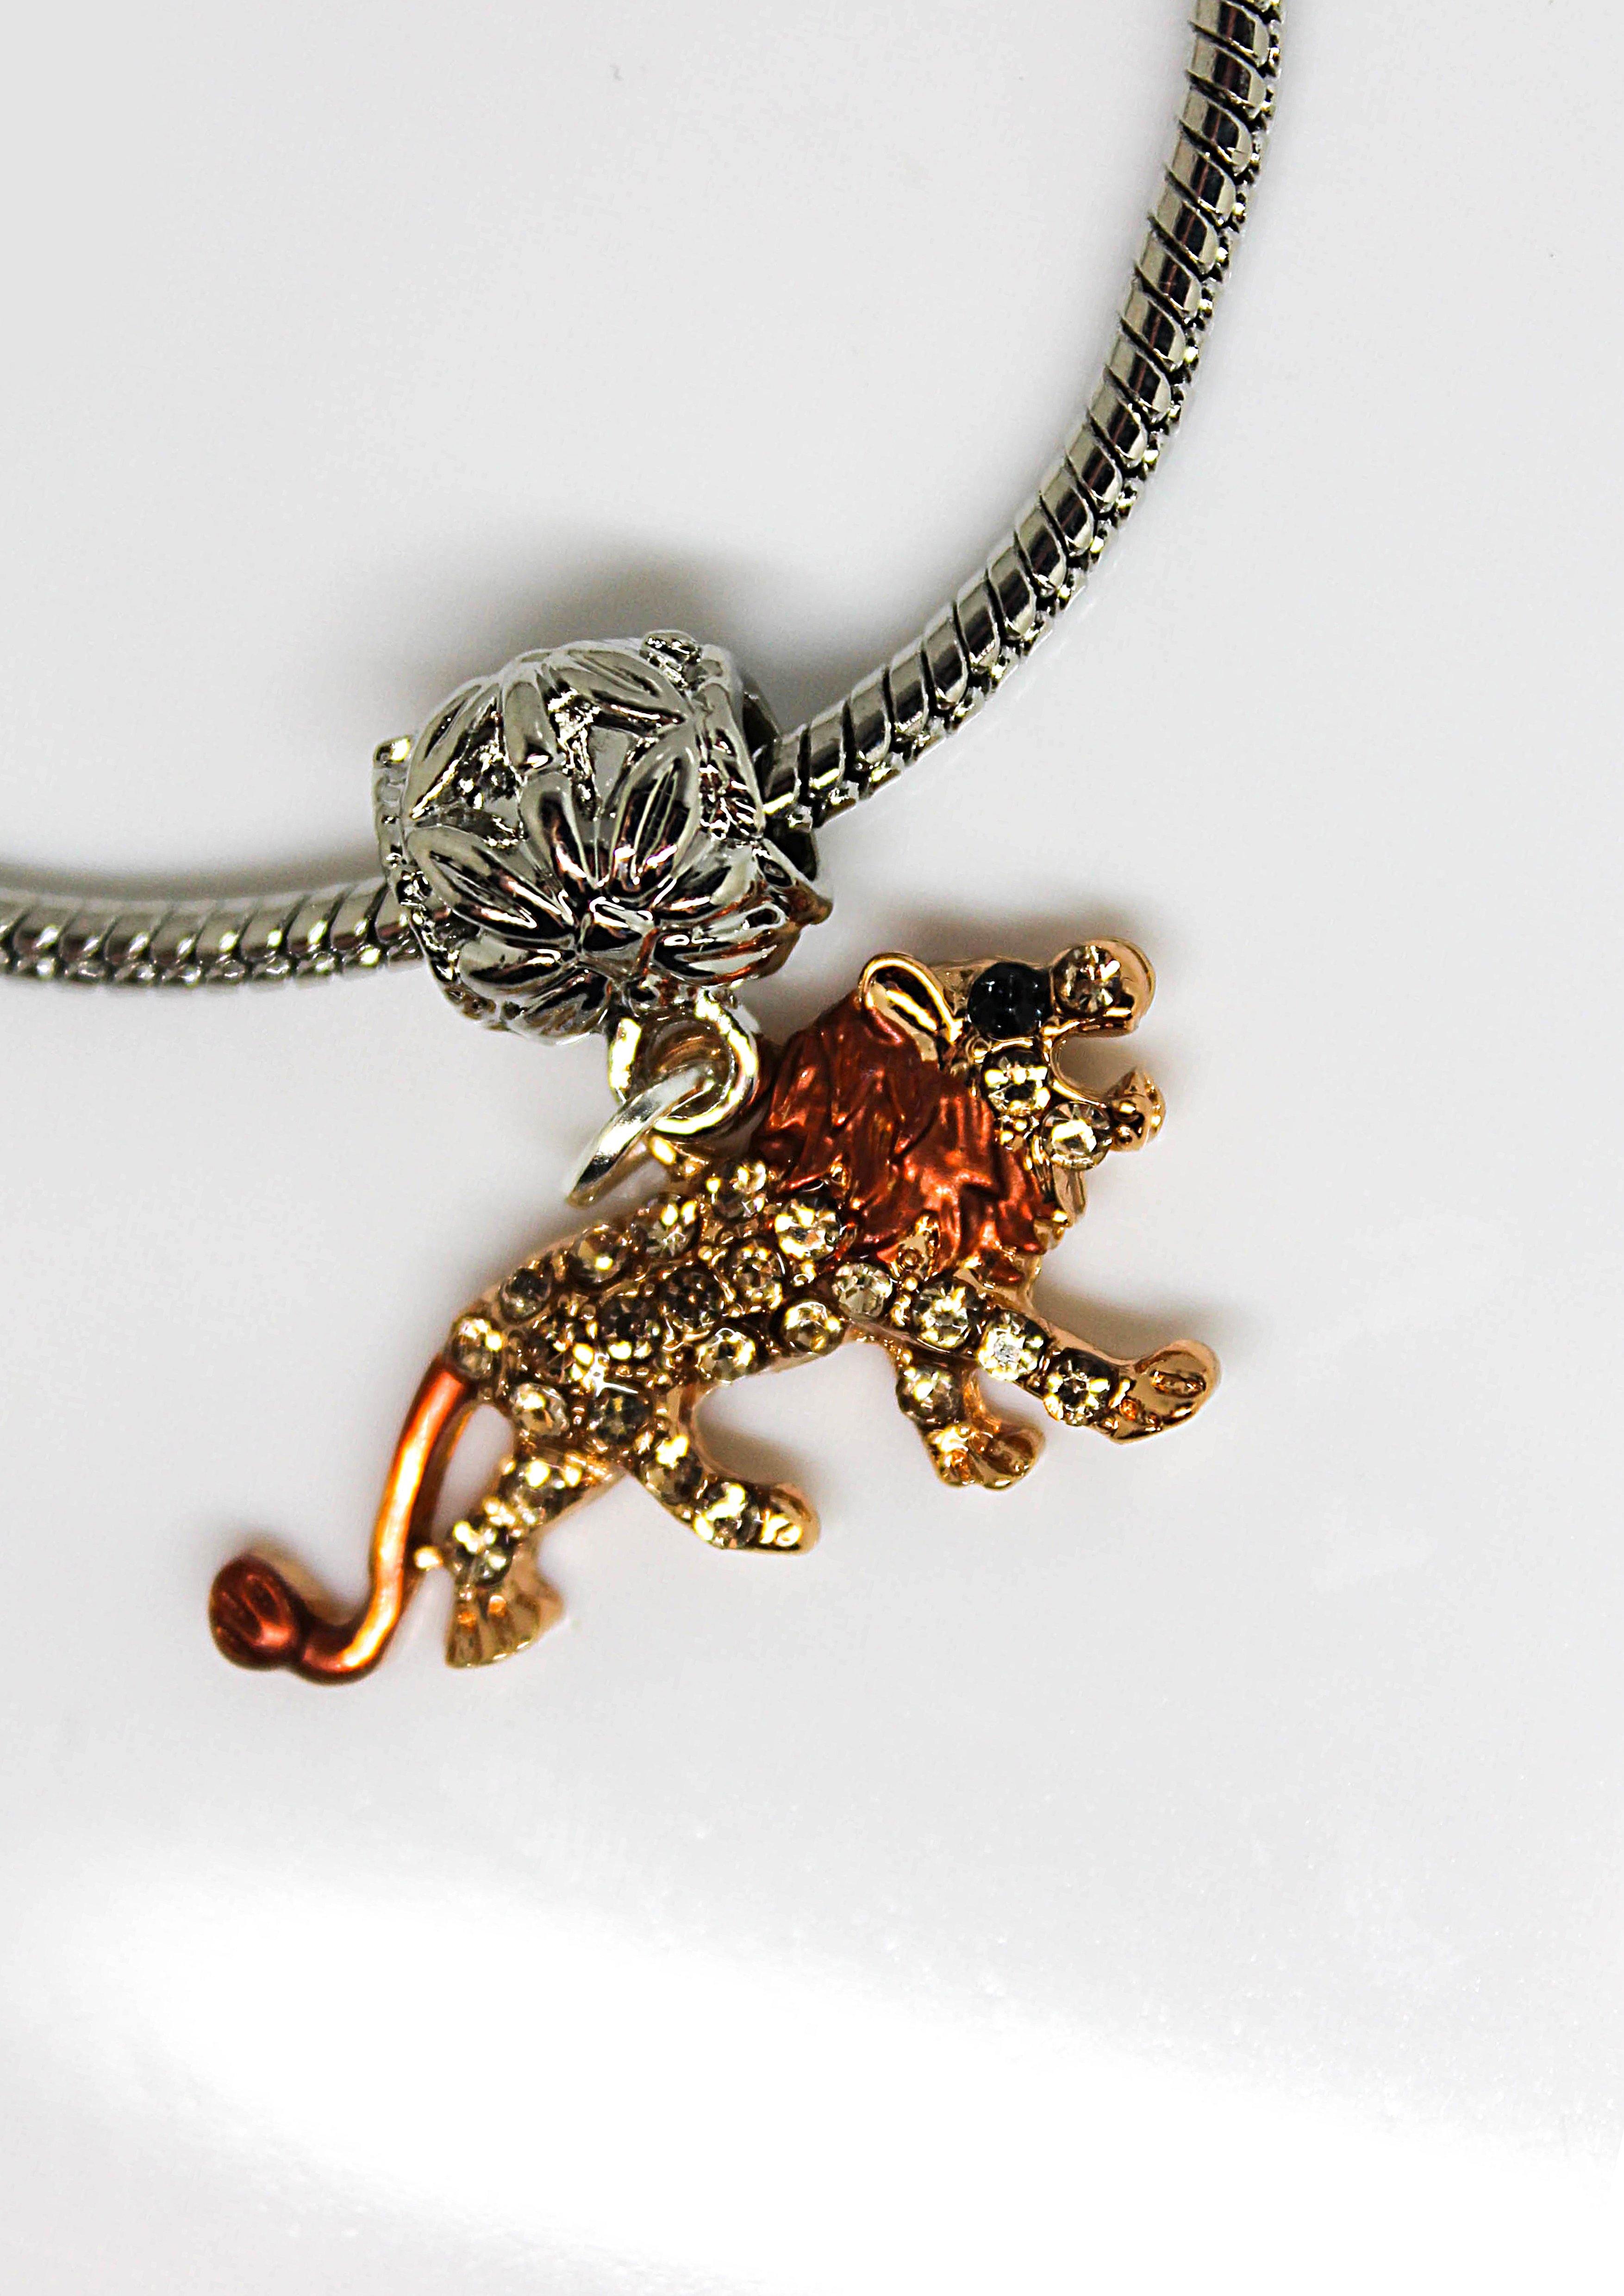 Lion Walking Charm Bracelet - Wildtouch - Wildtouch